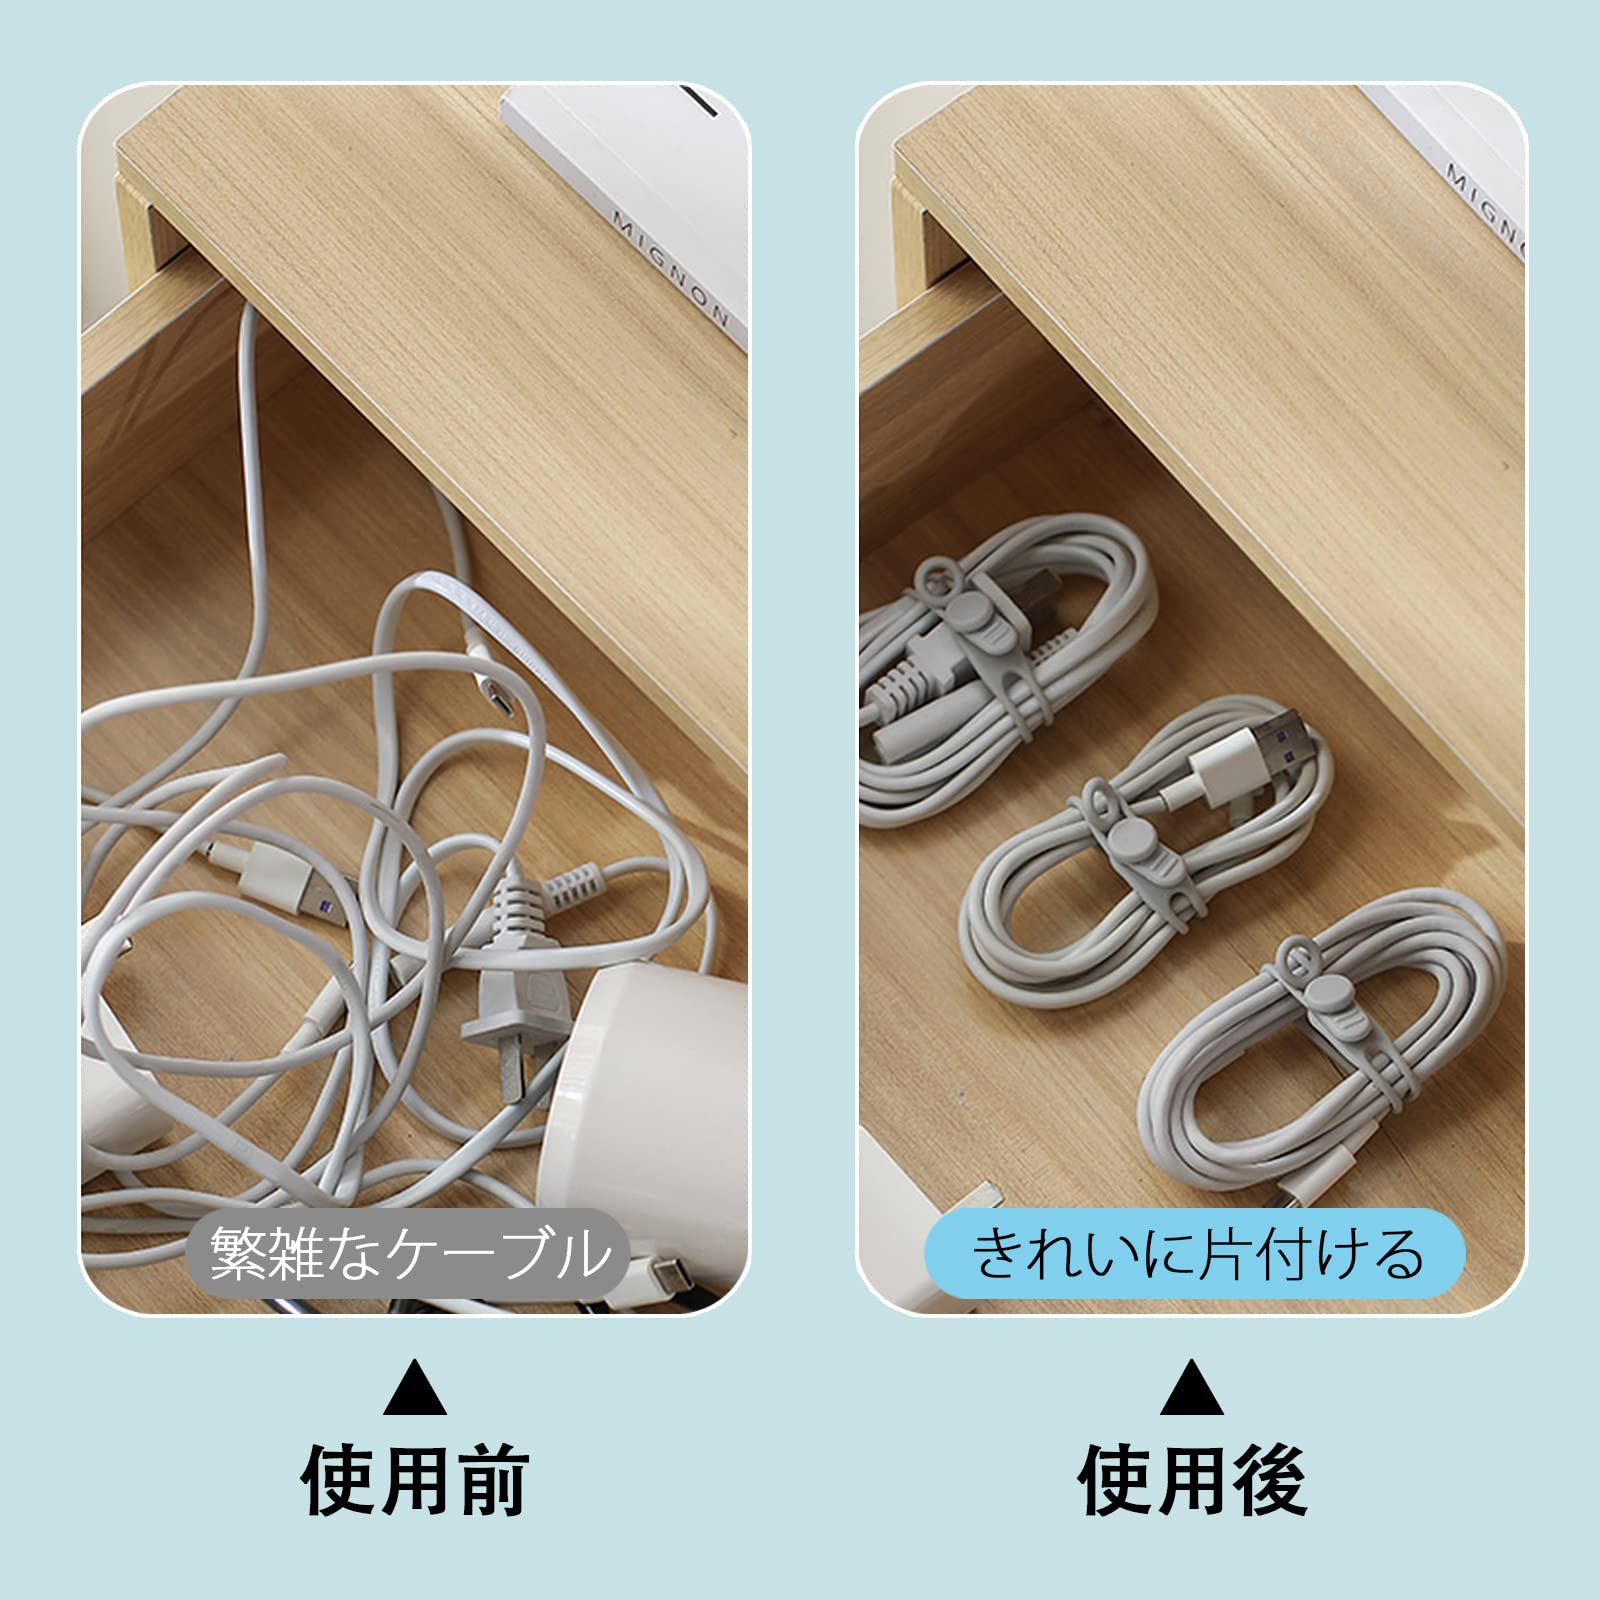  cable band silicon cable summarize . cordovan do clamping band storage band multifunction .. repeated use possibility cable Thai office kitchen car desk 